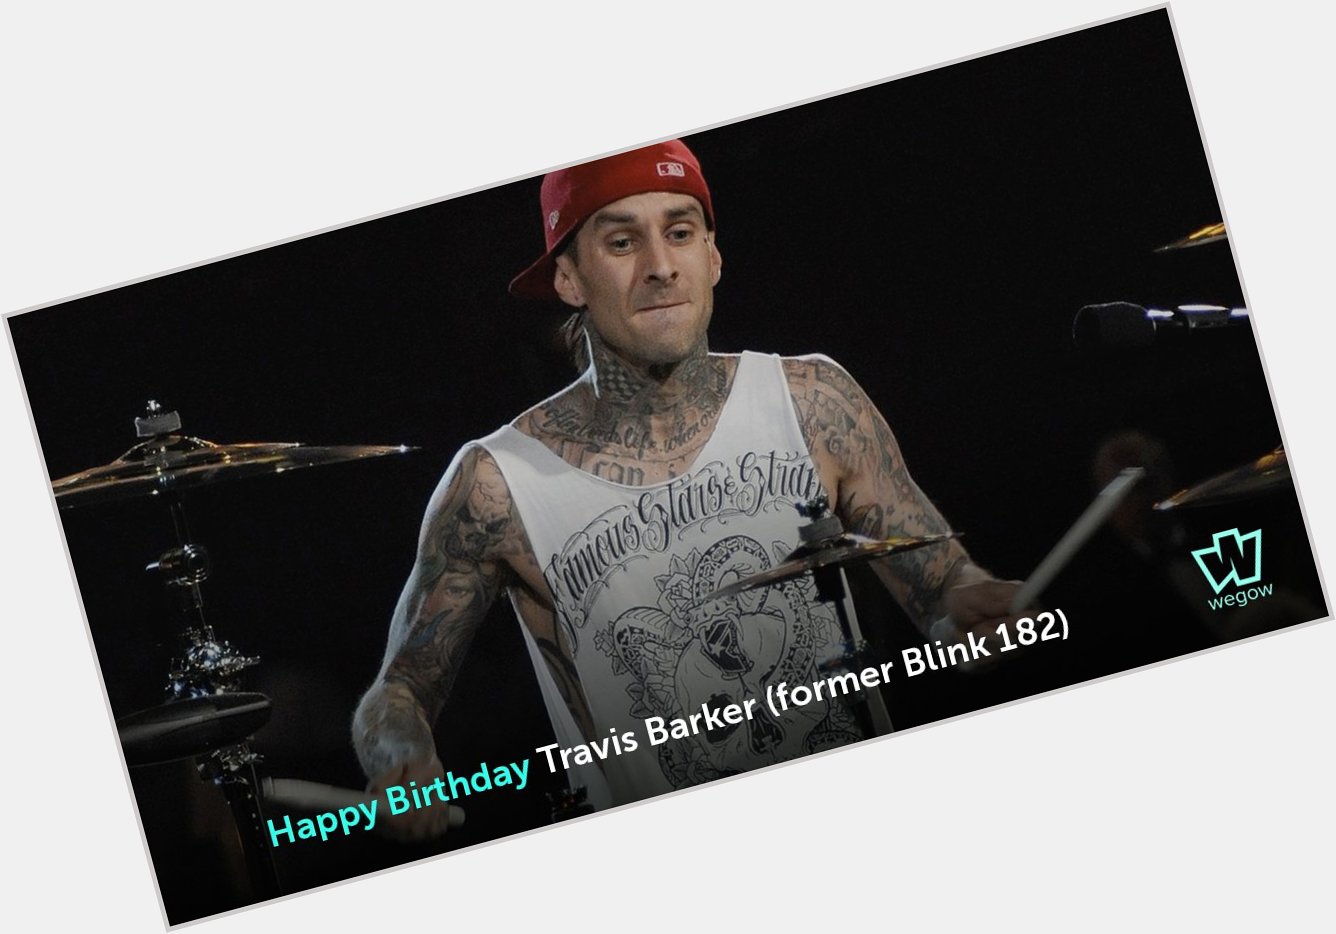 Happy Birthday Travis Barker! Check the artist info and know more about him here:  